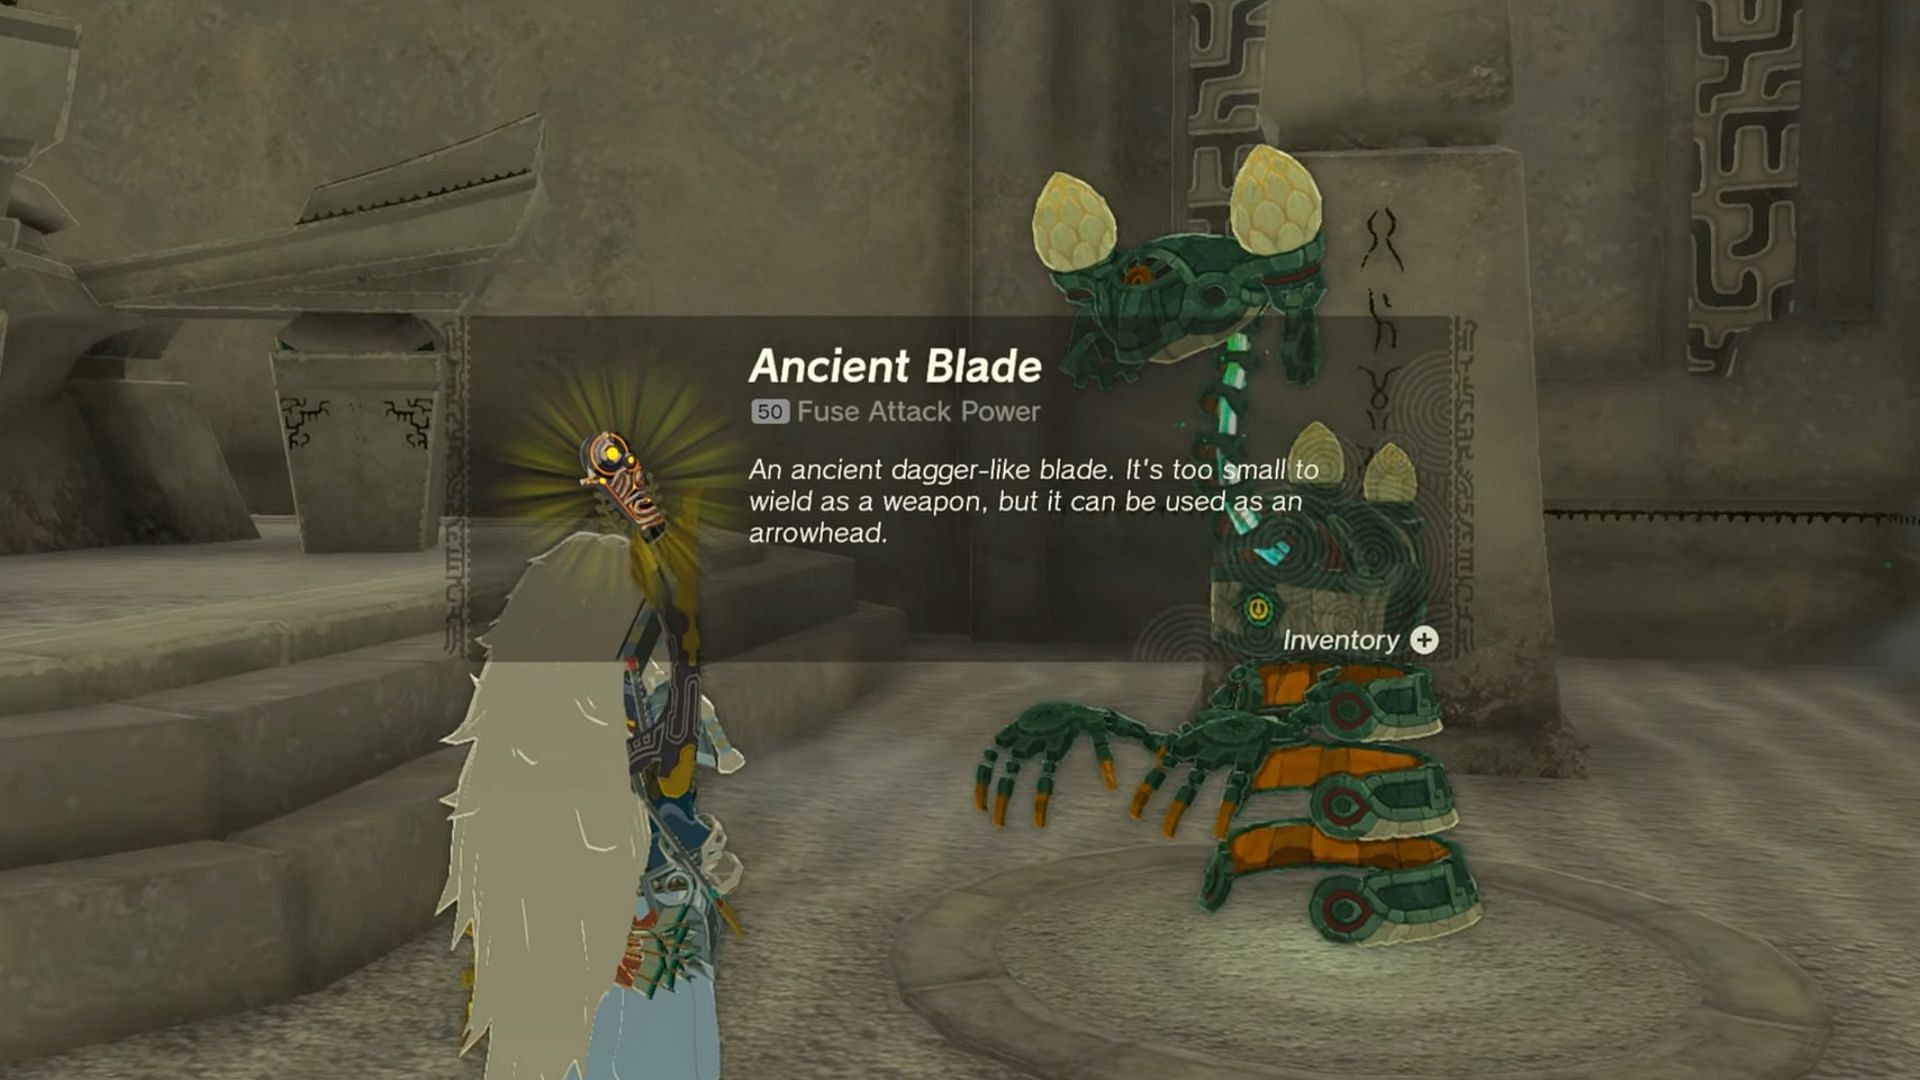 Purchasing Ancient Blades from the Construct (Image via Nintendo)